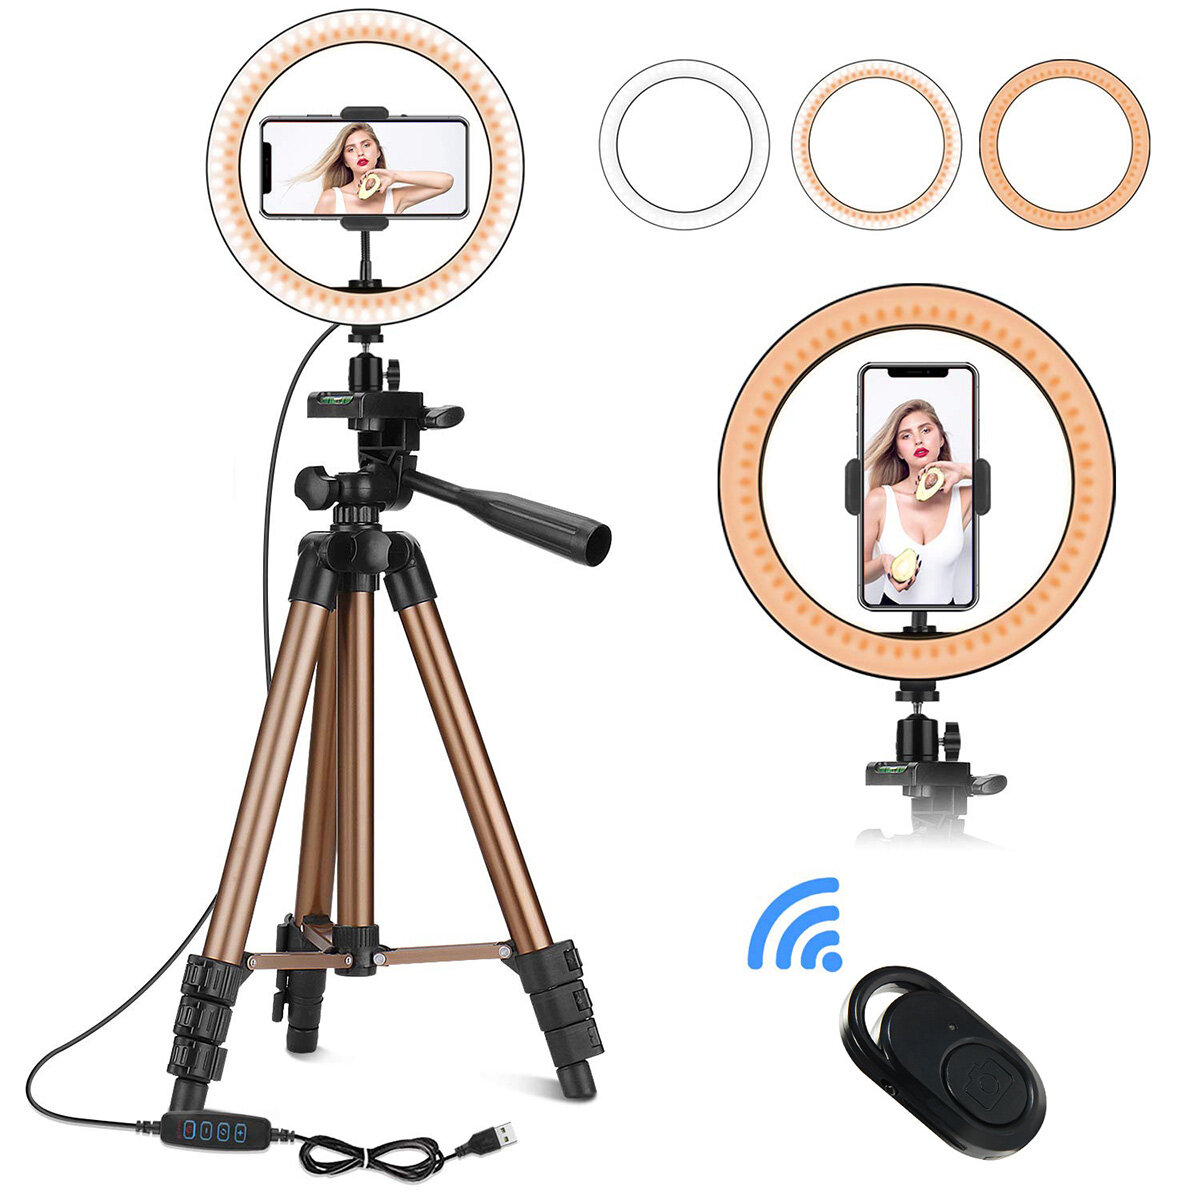 Controllable 6 inch 10 inch LED Selfie Ring Light + Tripod Stand + Phone Holder Photography YouTube Video Makeup Live St